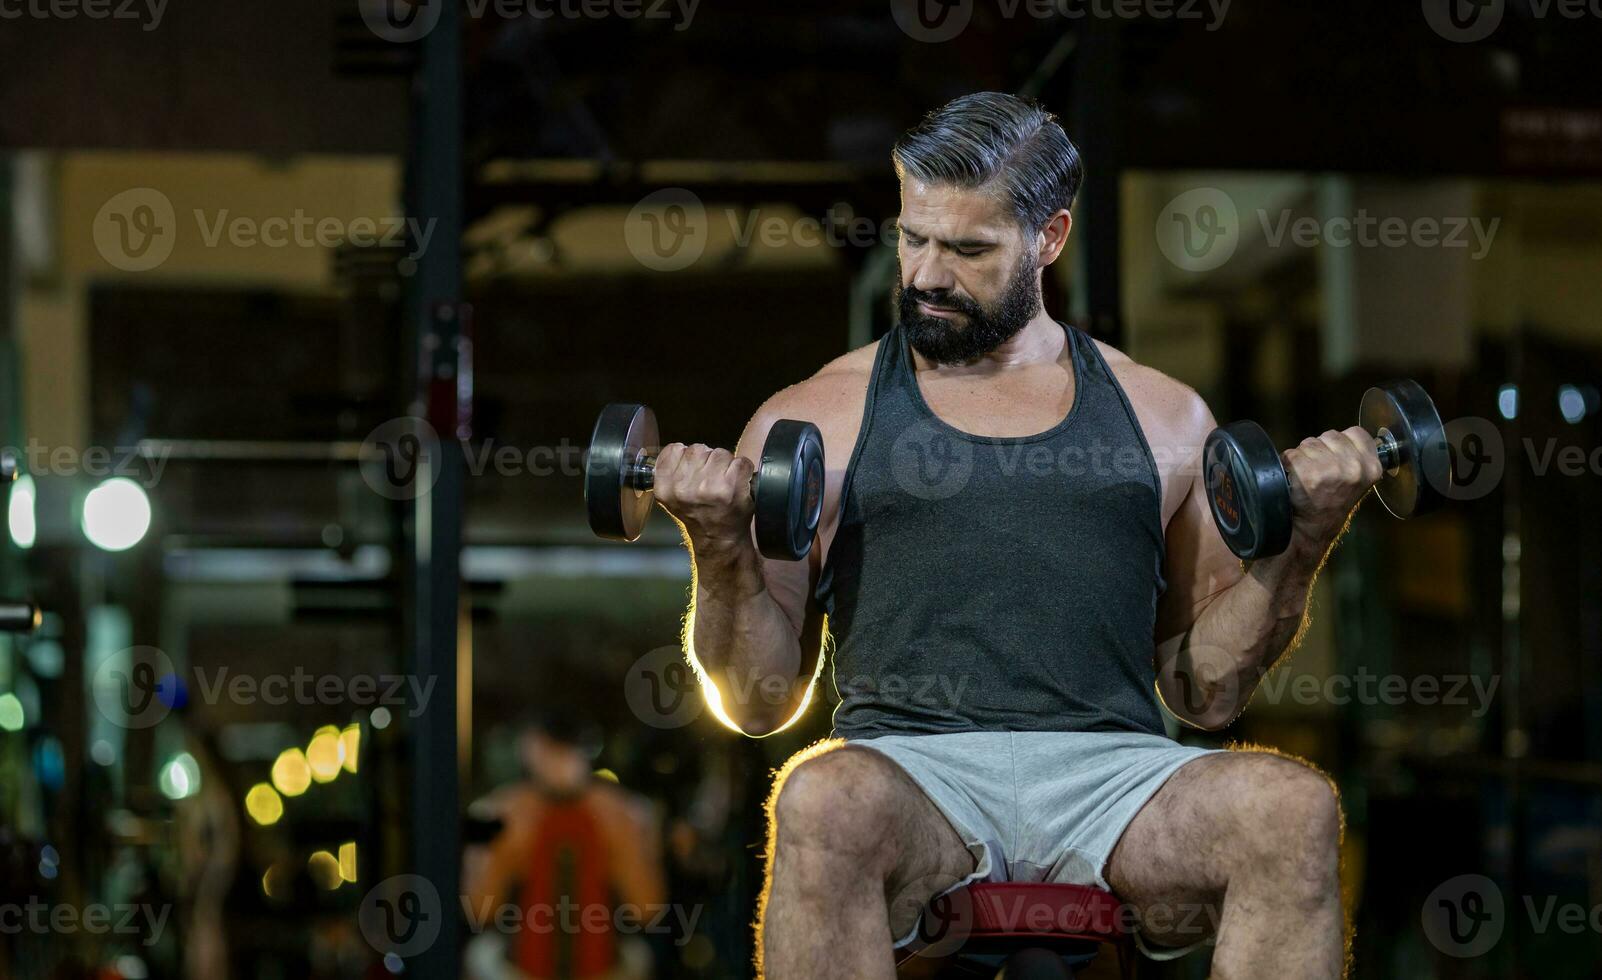 https://static.vecteezy.com/system/resources/previews/027/541/742/non_2x/caucasian-beard-muscular-sport-man-is-practice-weight-training-on-double-dumbbells-for-biceps-and-triceps-muscle-inside-gym-with-dark-background-for-exercising-and-workout-concept-photo.jpg